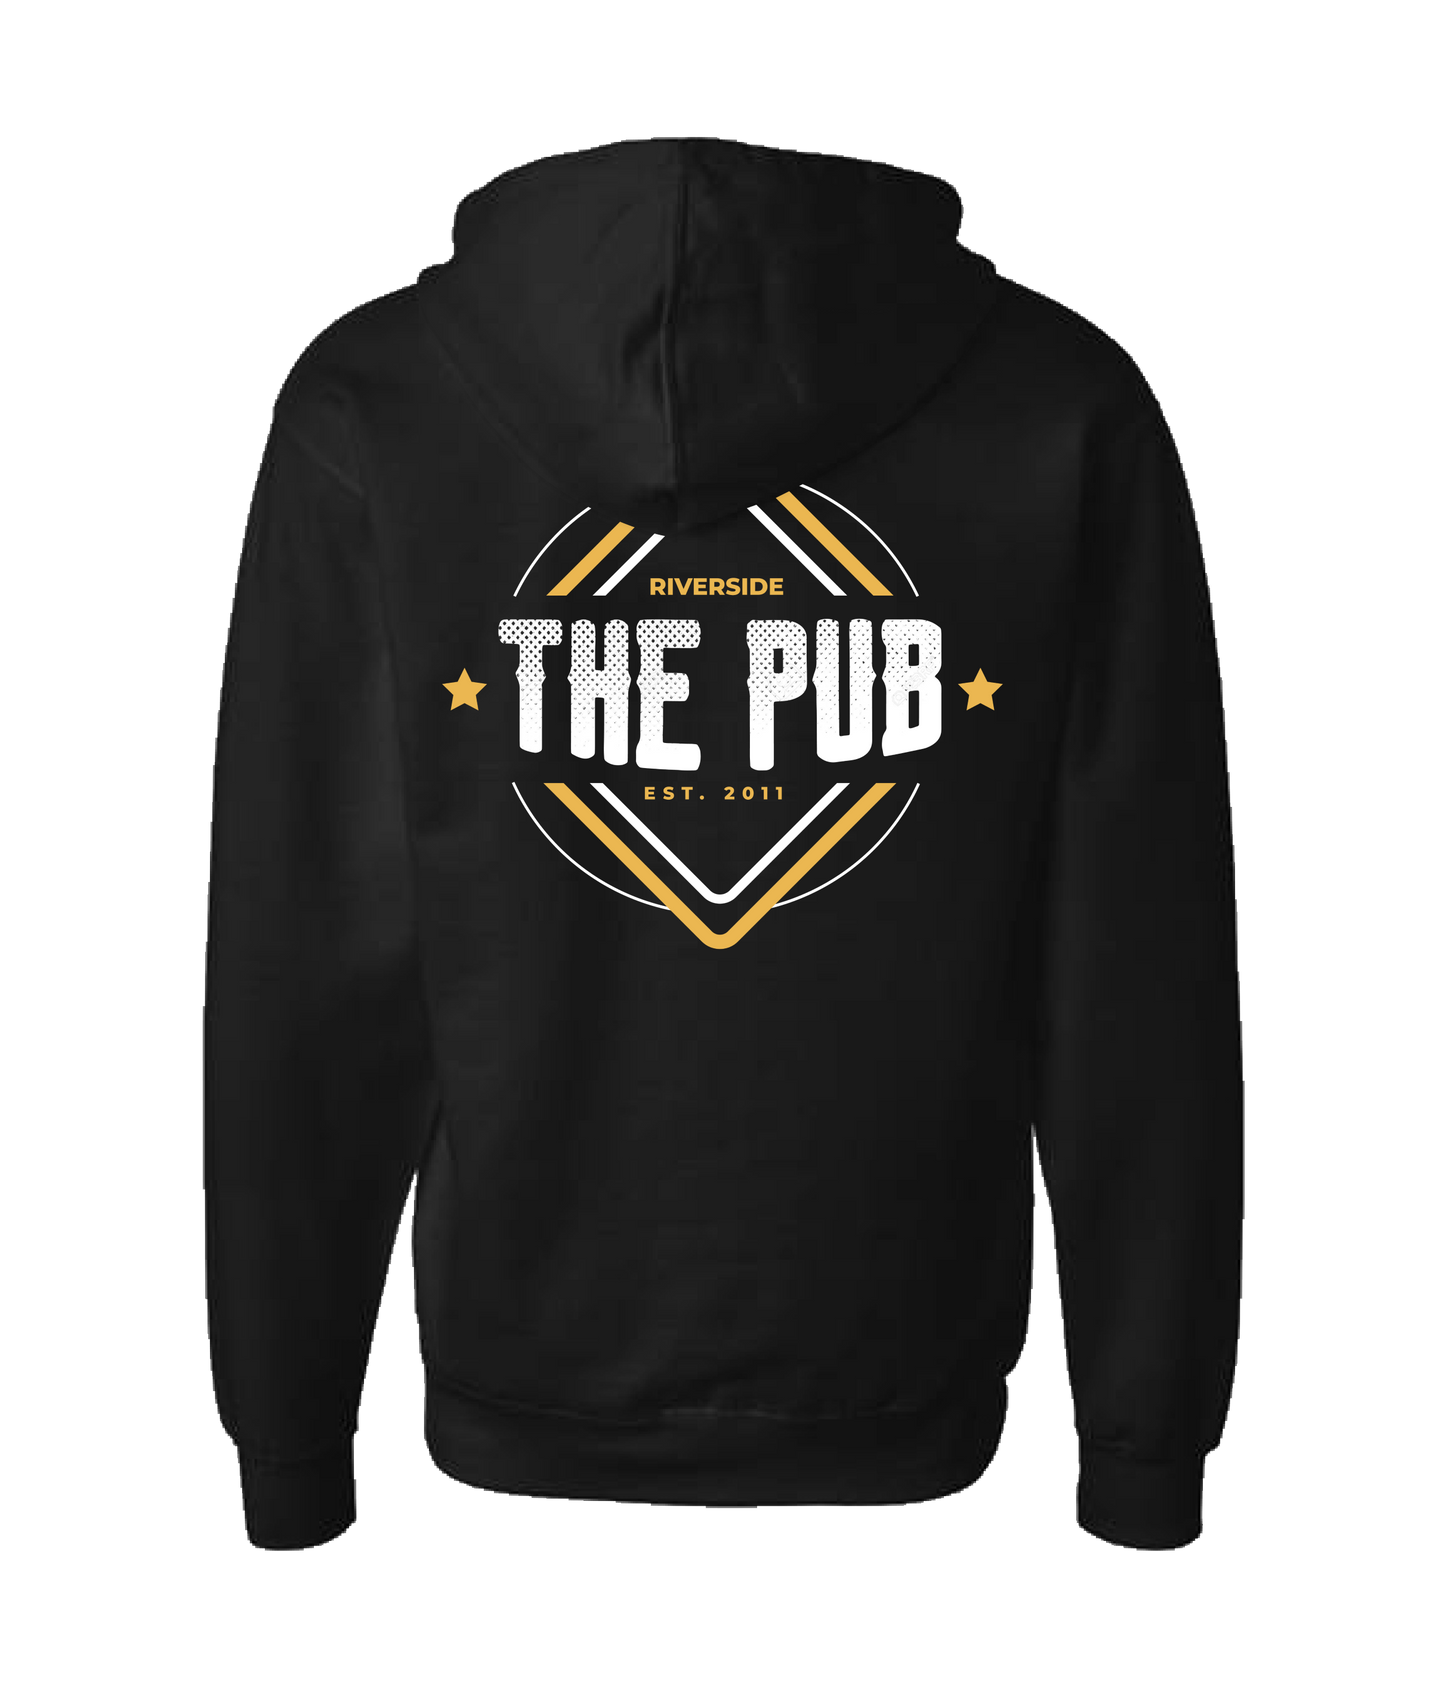 Riverside Pub and Grill - The Pub - Black Zip Up Hoodie